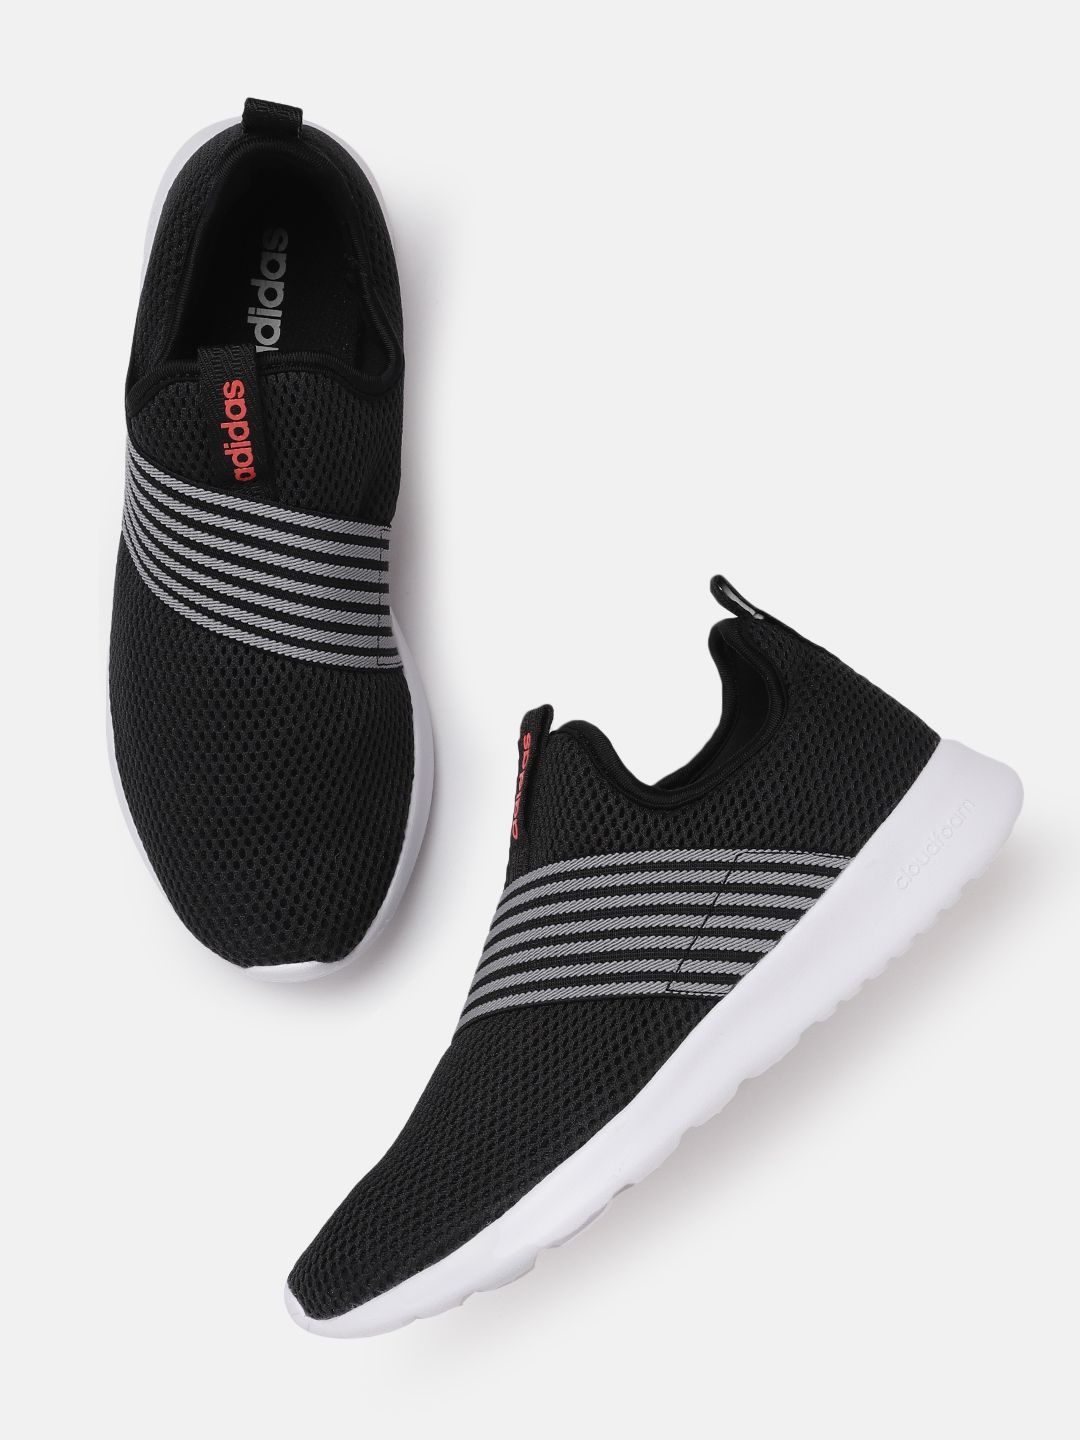 ADIDAS Women Black Woven Design Contemx Running Shoes Price in India